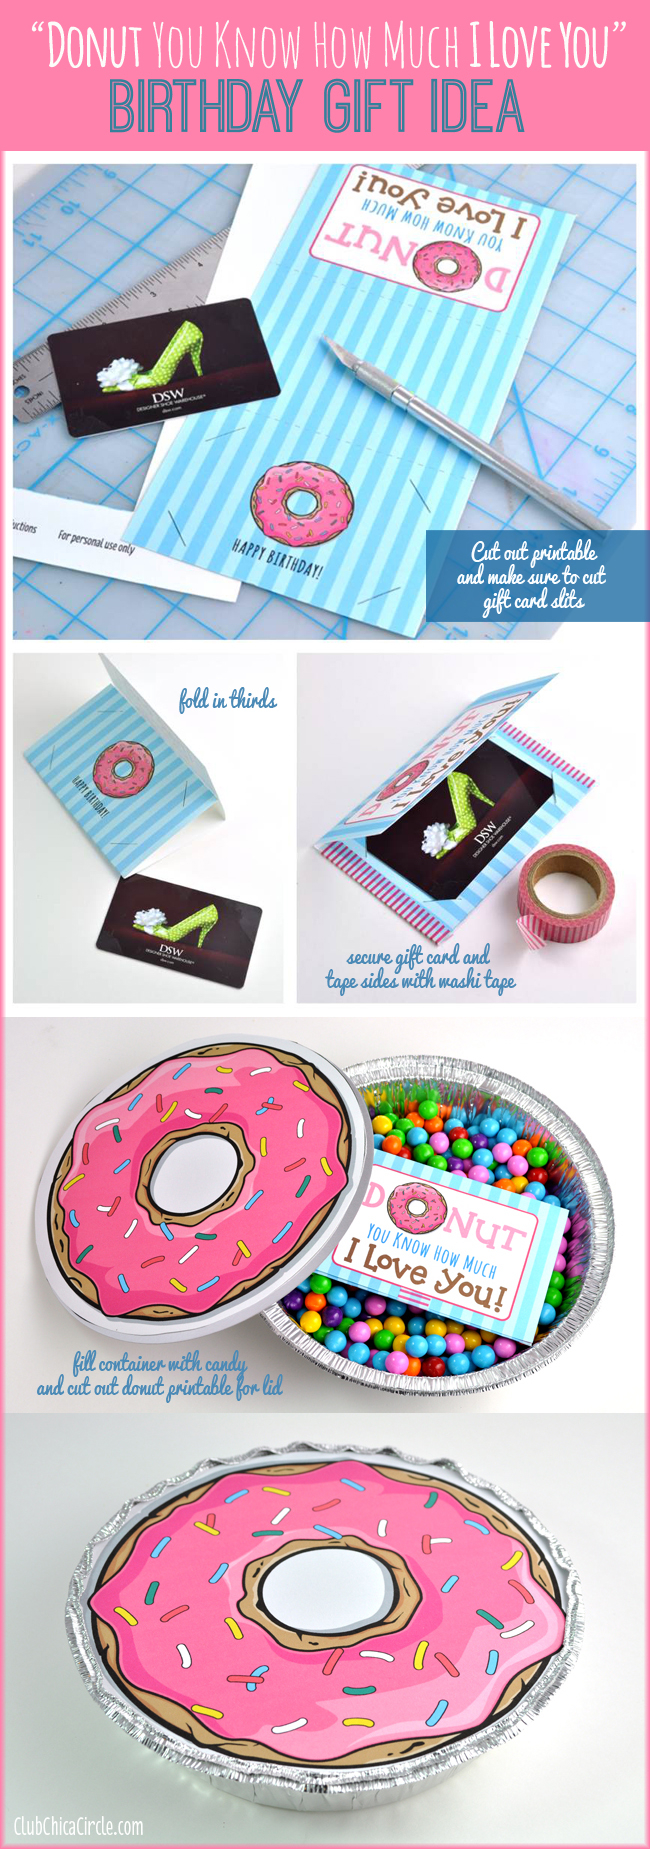 Gift Card Birthday Ideas Donut You Know How Much I Love You Birthday Gift Idea